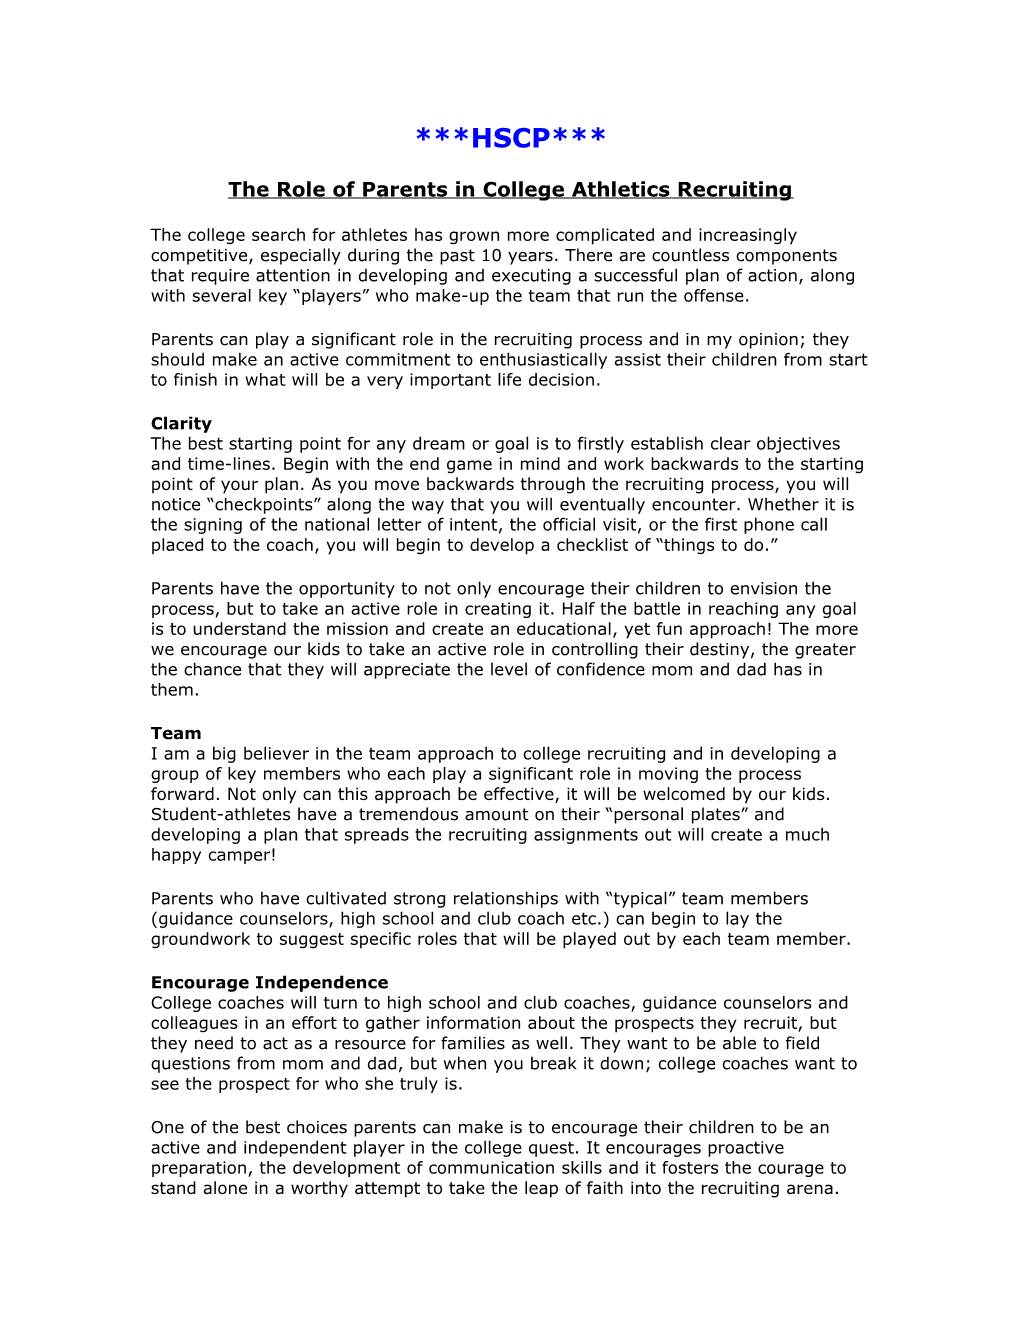 The Role of Parents in College Athletics Recruiting